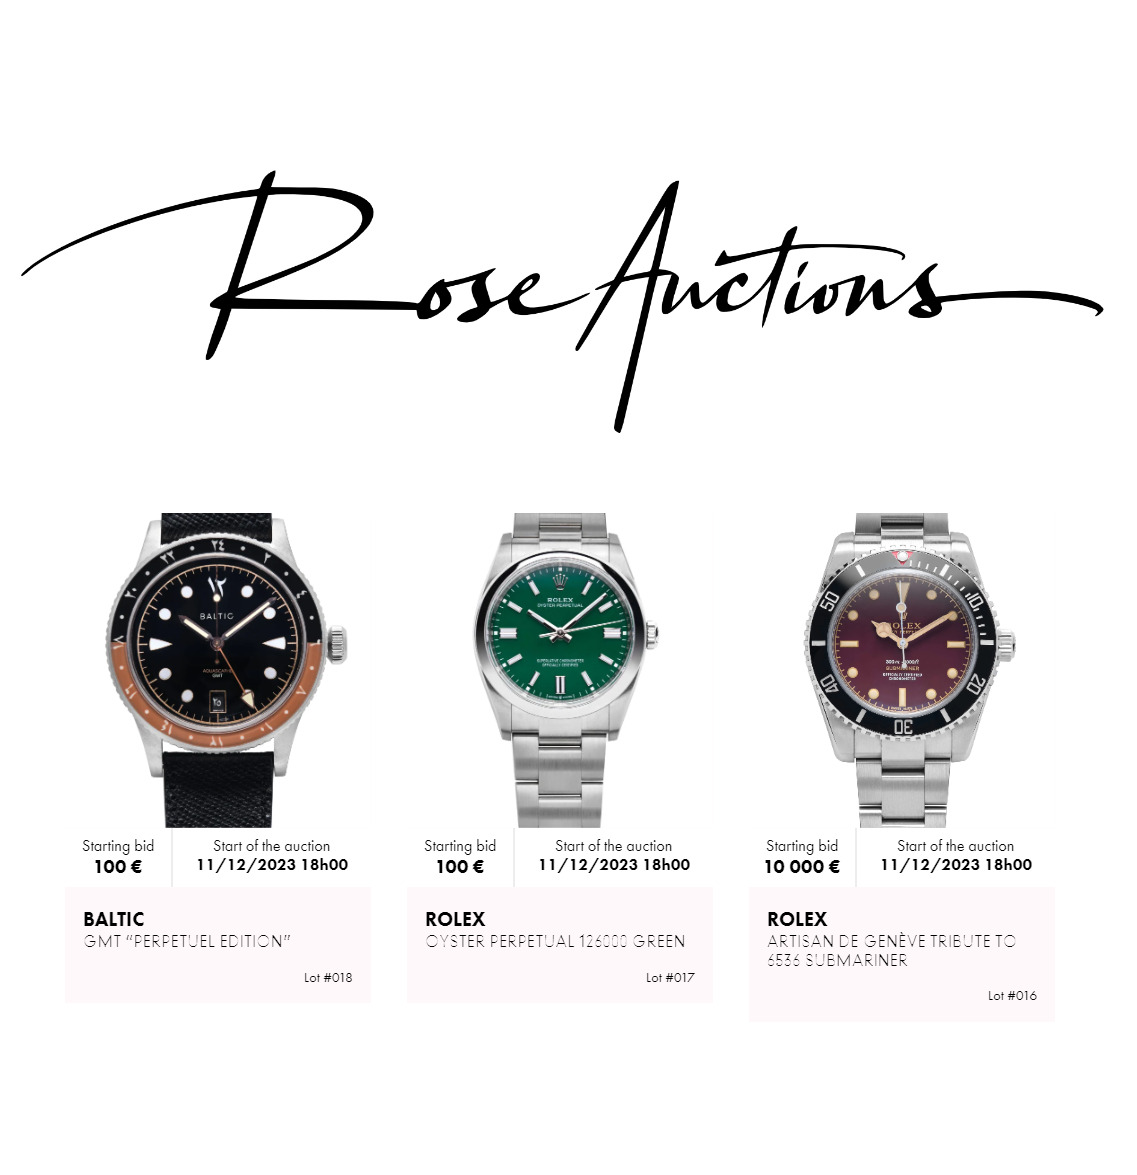 “WATCH AUCTIONS, FOR WATCH LOVERS” BY ROSE AUCTION - MondaniWeb